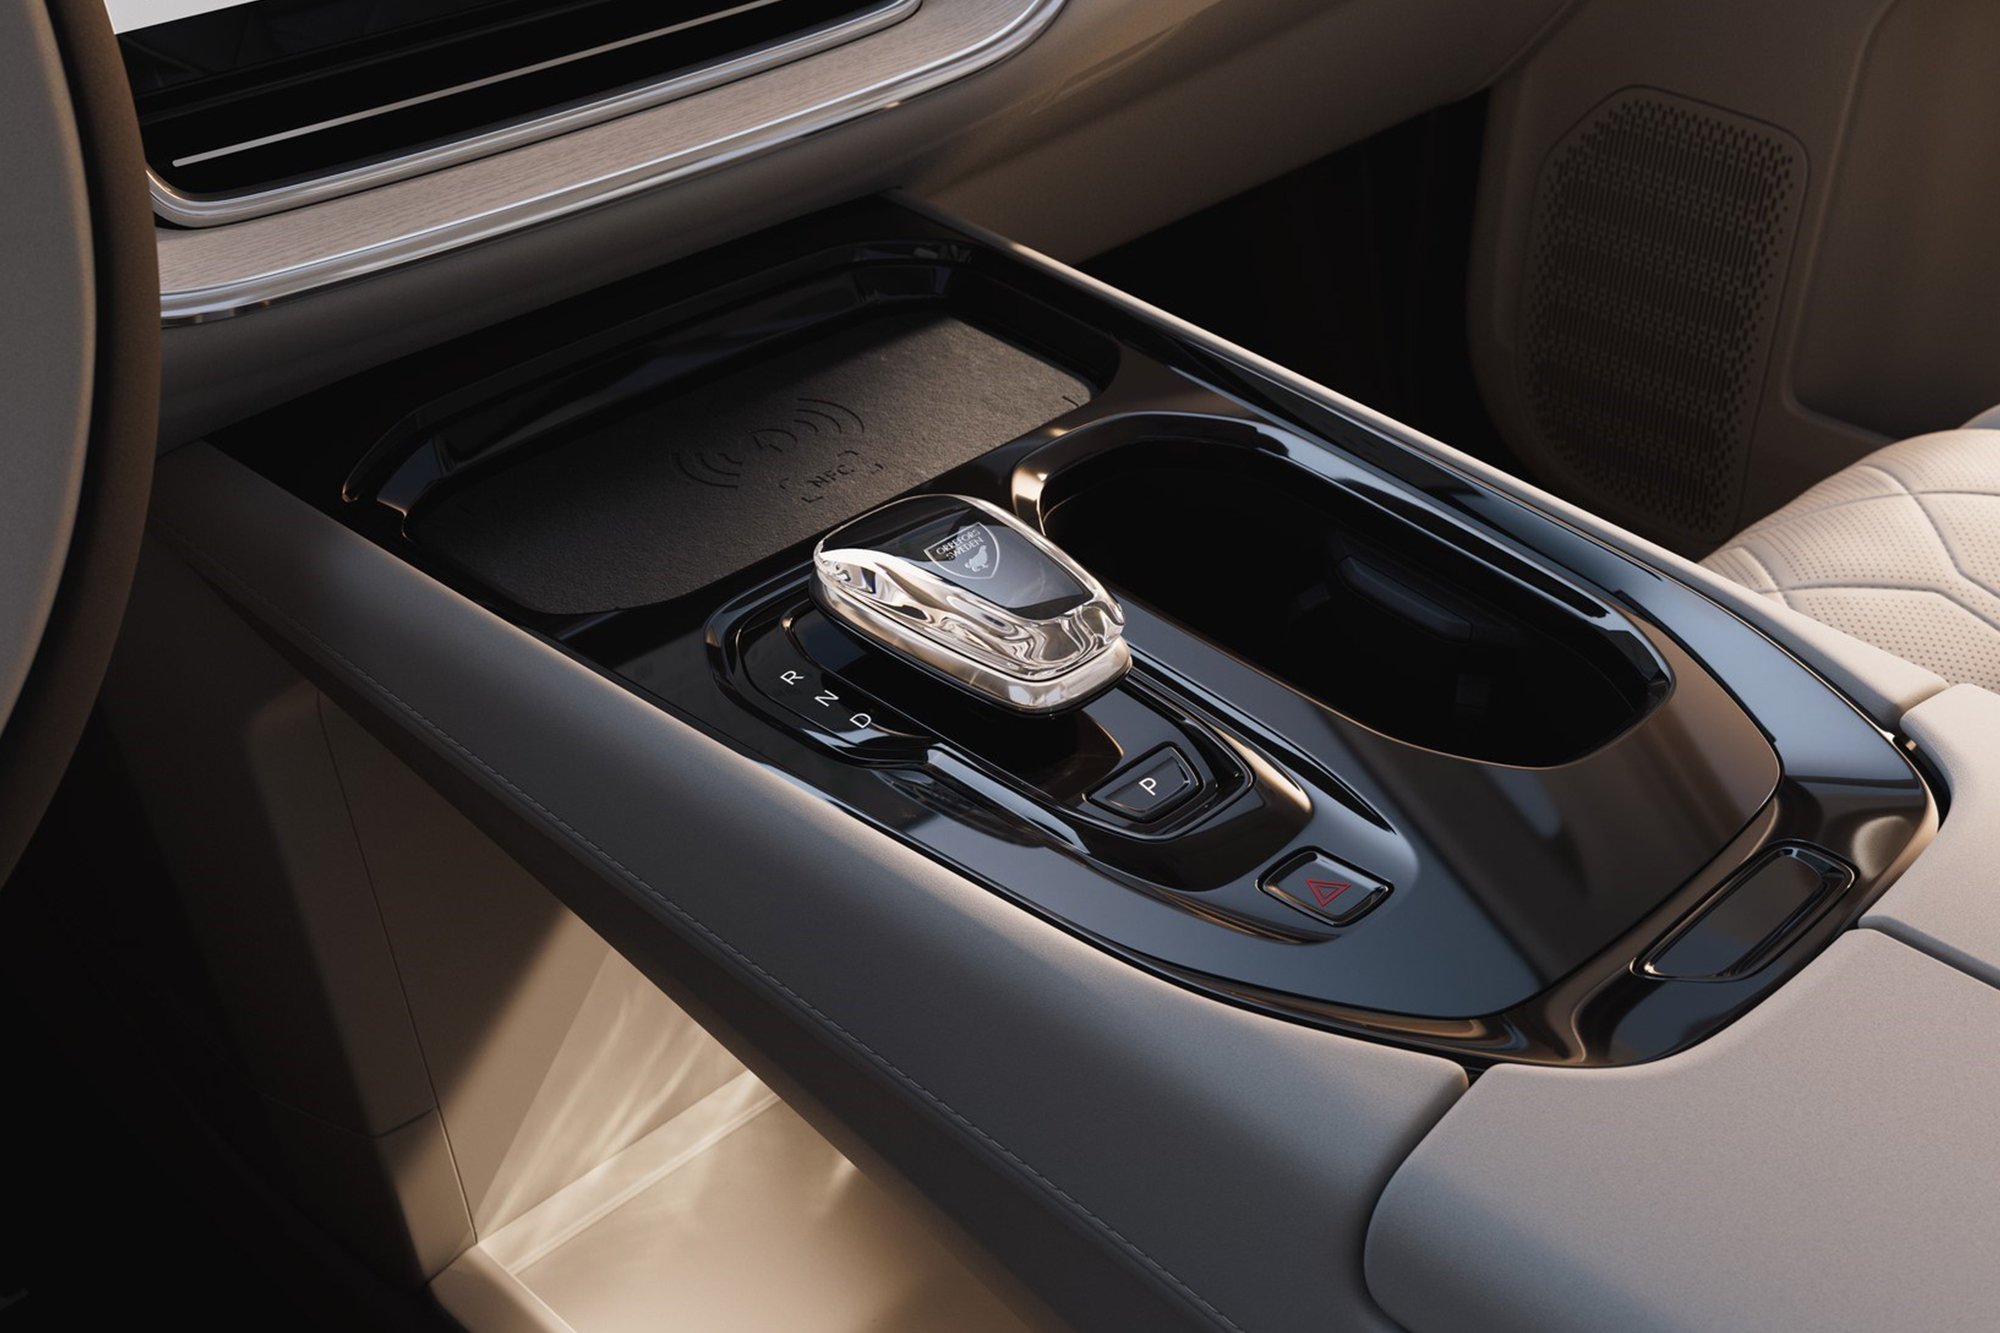 The exquisite Scandinavian interior design with Orrefors crystal gear shifter of the Volvo EM90